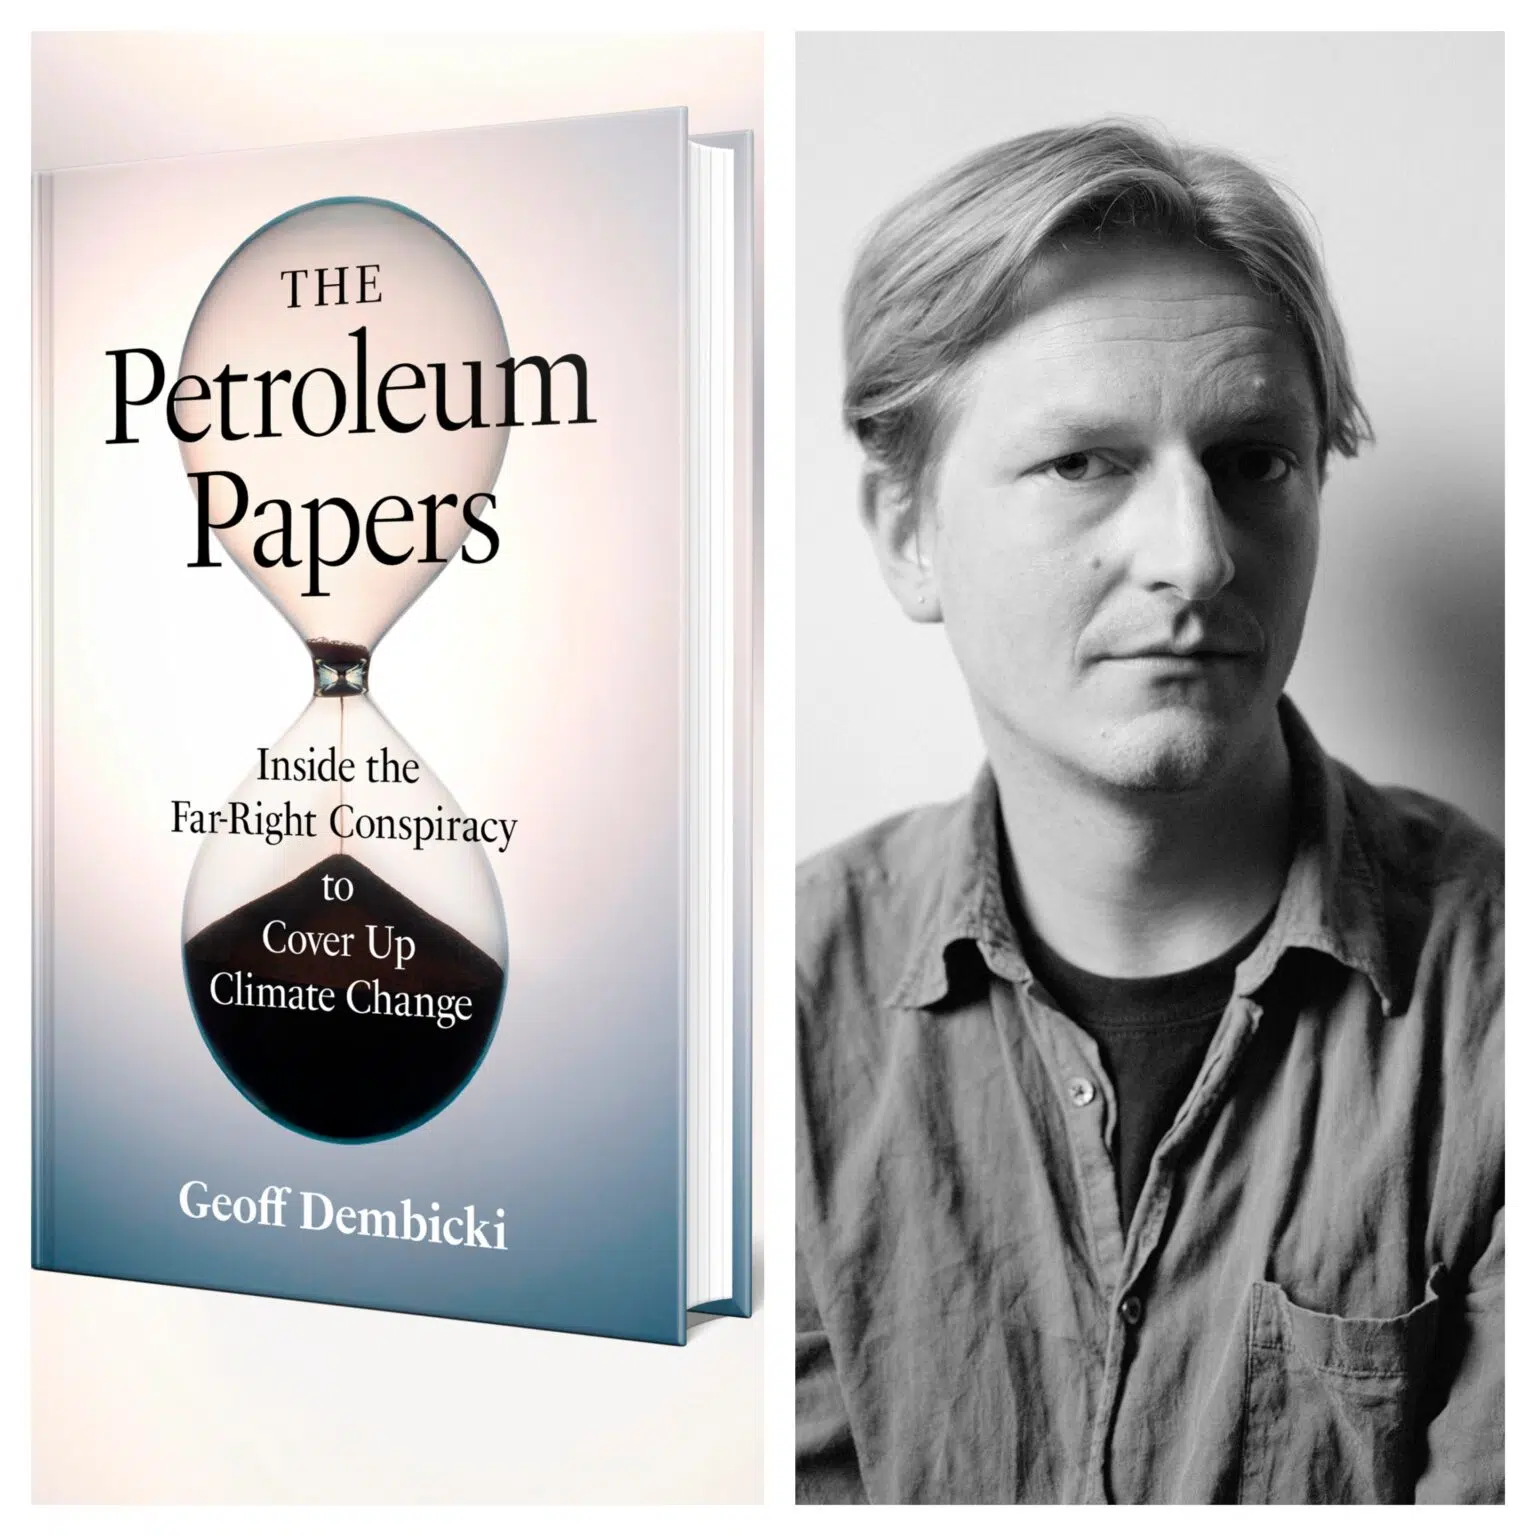 Book cover with black sand hourglass and text 'The Petroleum Papers: inside the far-right conspiracy to cover up climate change by Geoff Dembicki'; right: author Geoff Dembicki, man in button-down shirt in black and white